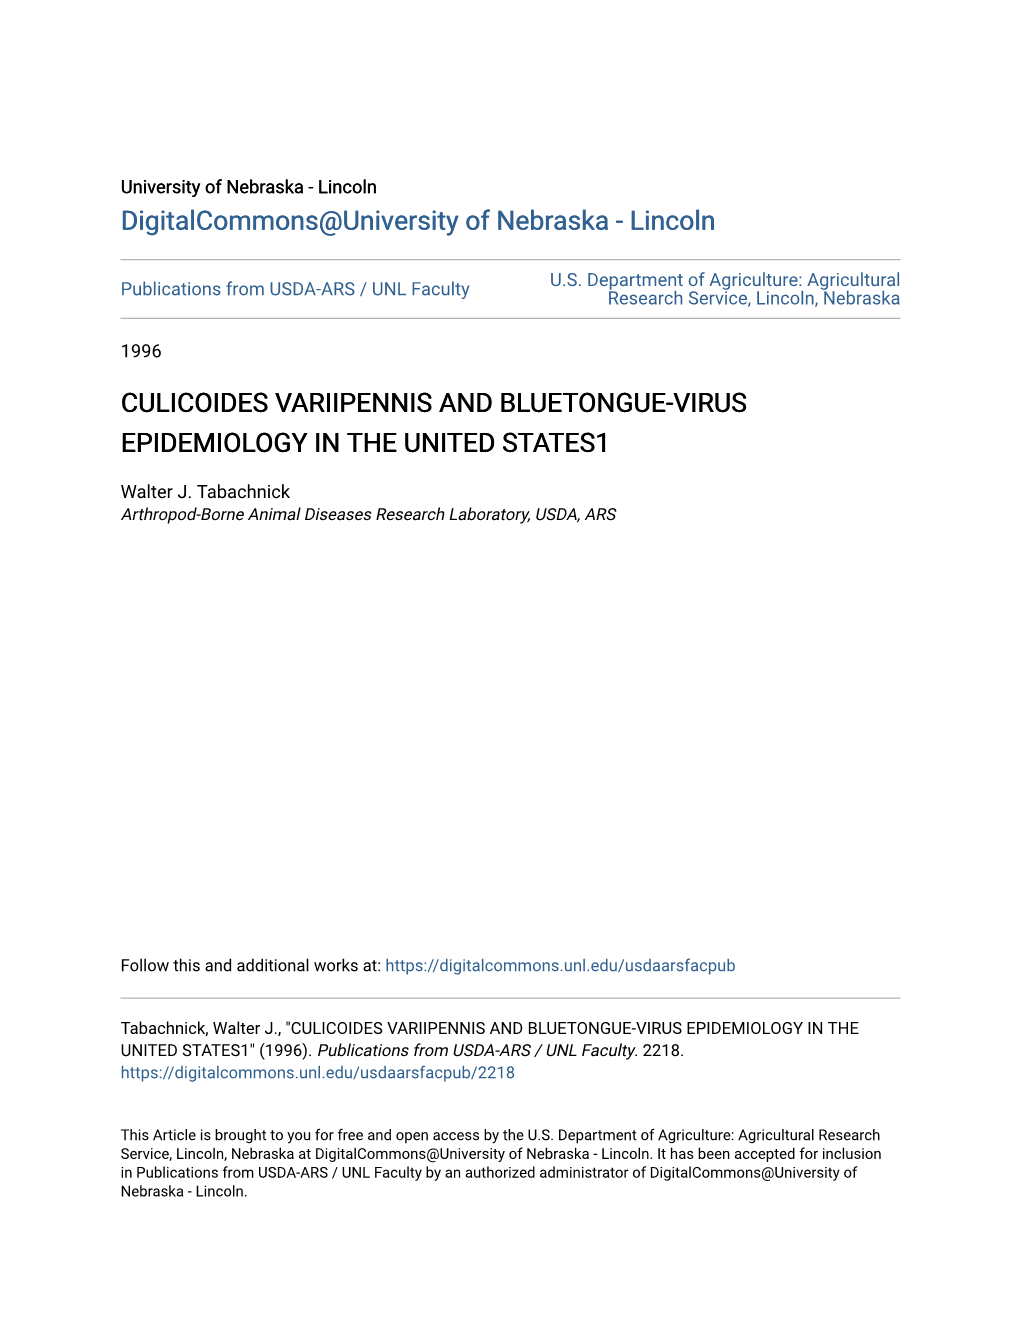 Culicoides Variipennis and Bluetongue-Virus Epidemiology in the United States1